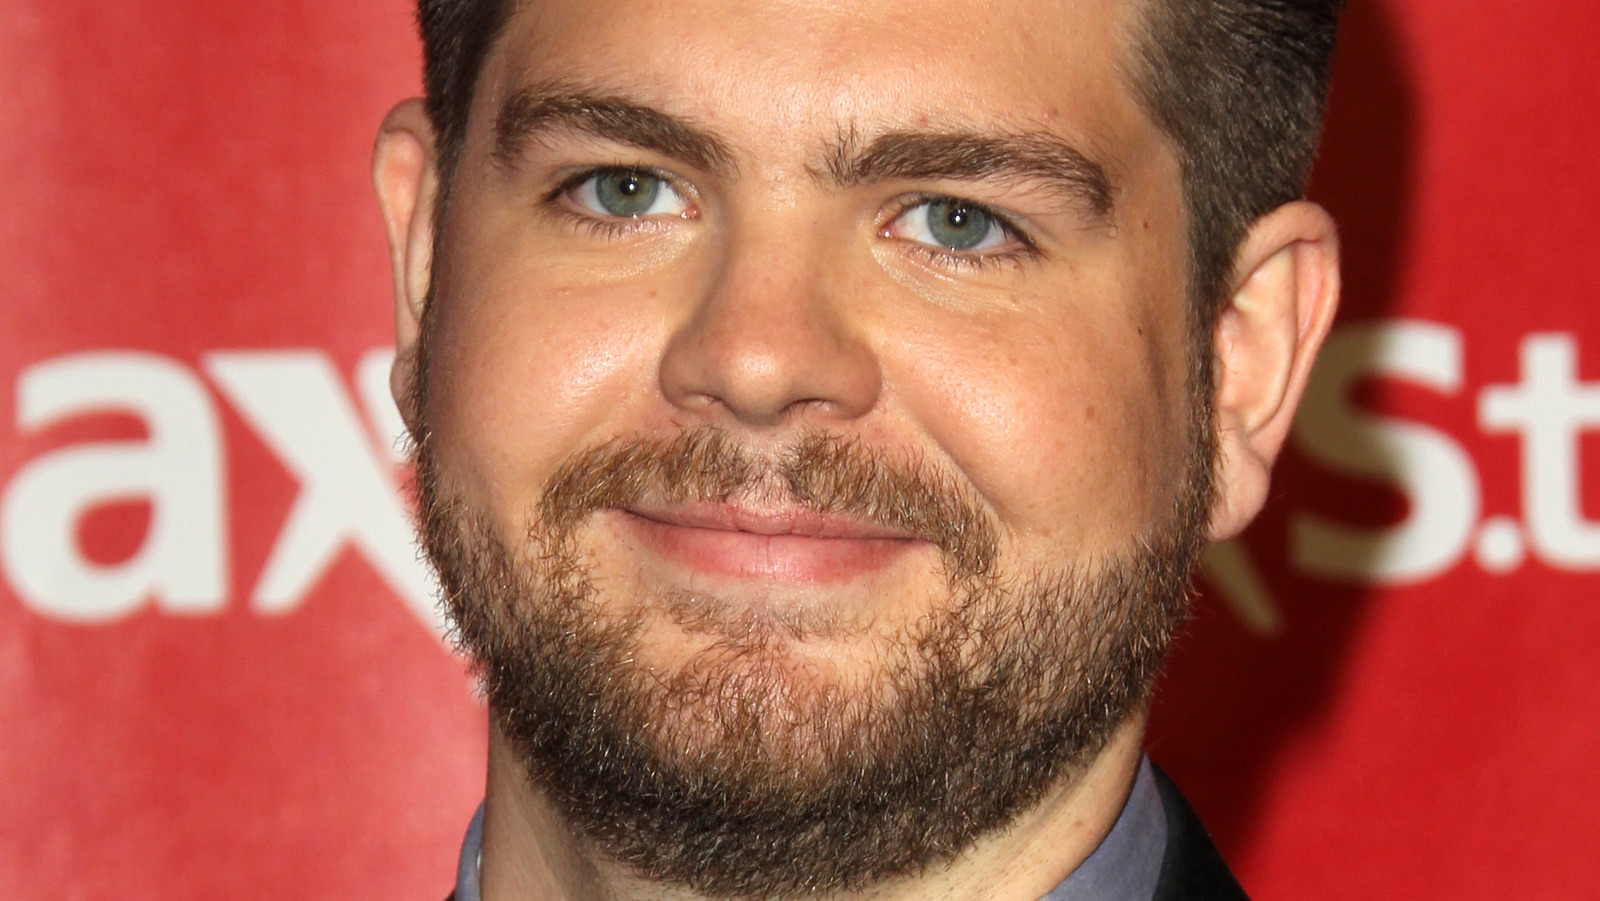 Jack Osbourne On Portals To Hell's Differences From The Osbournes Want